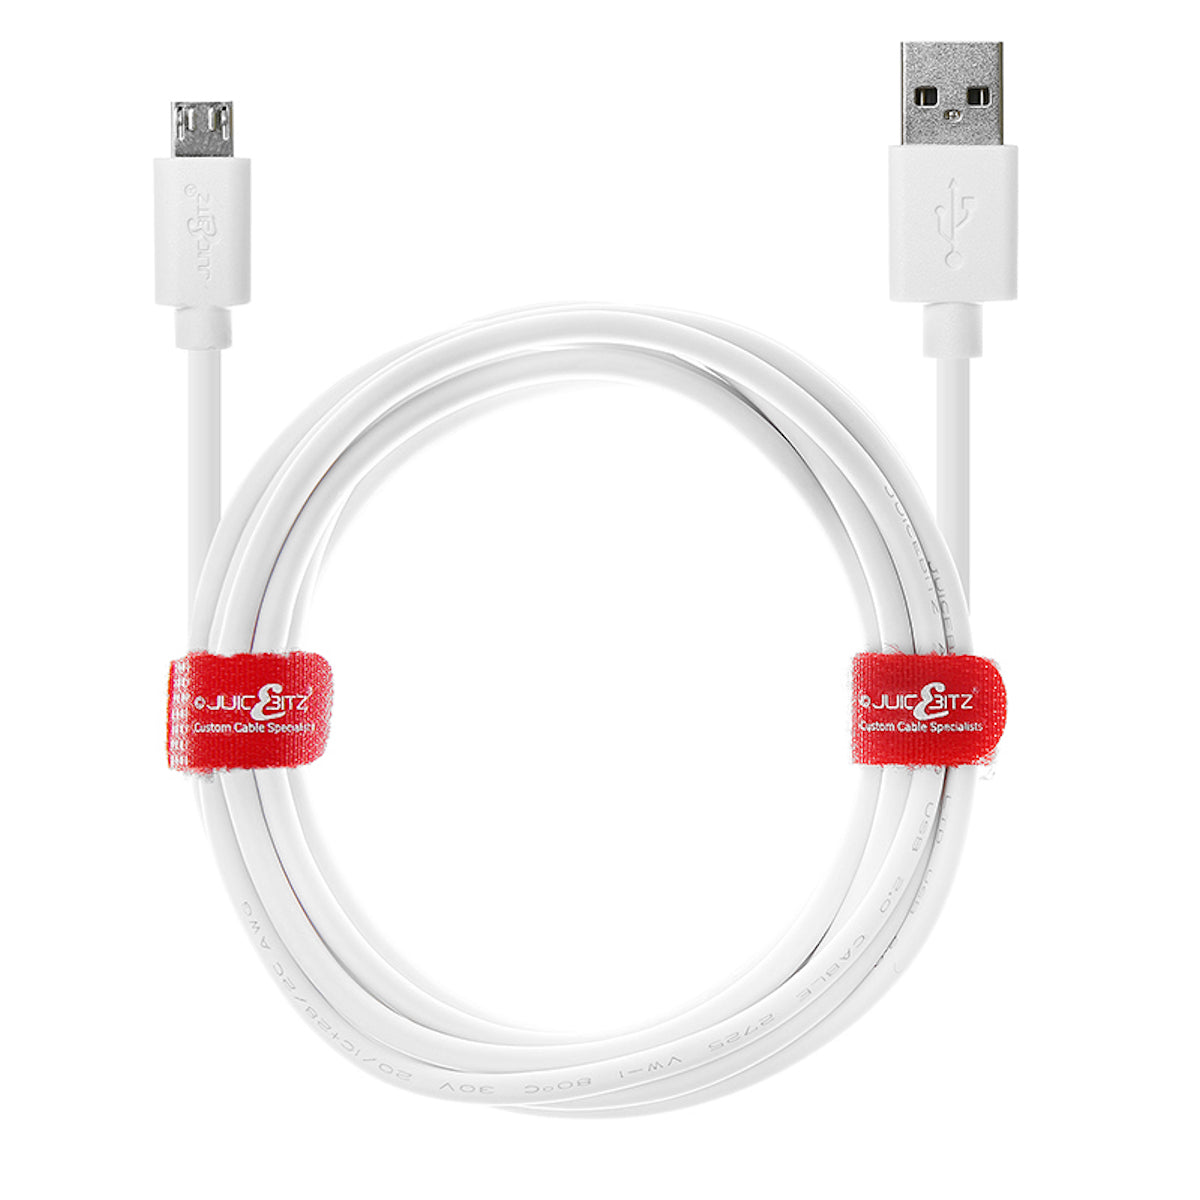 USB 2.0 to Micro-USB Fast Charger Cable High Speed Data Transfer Lead - White